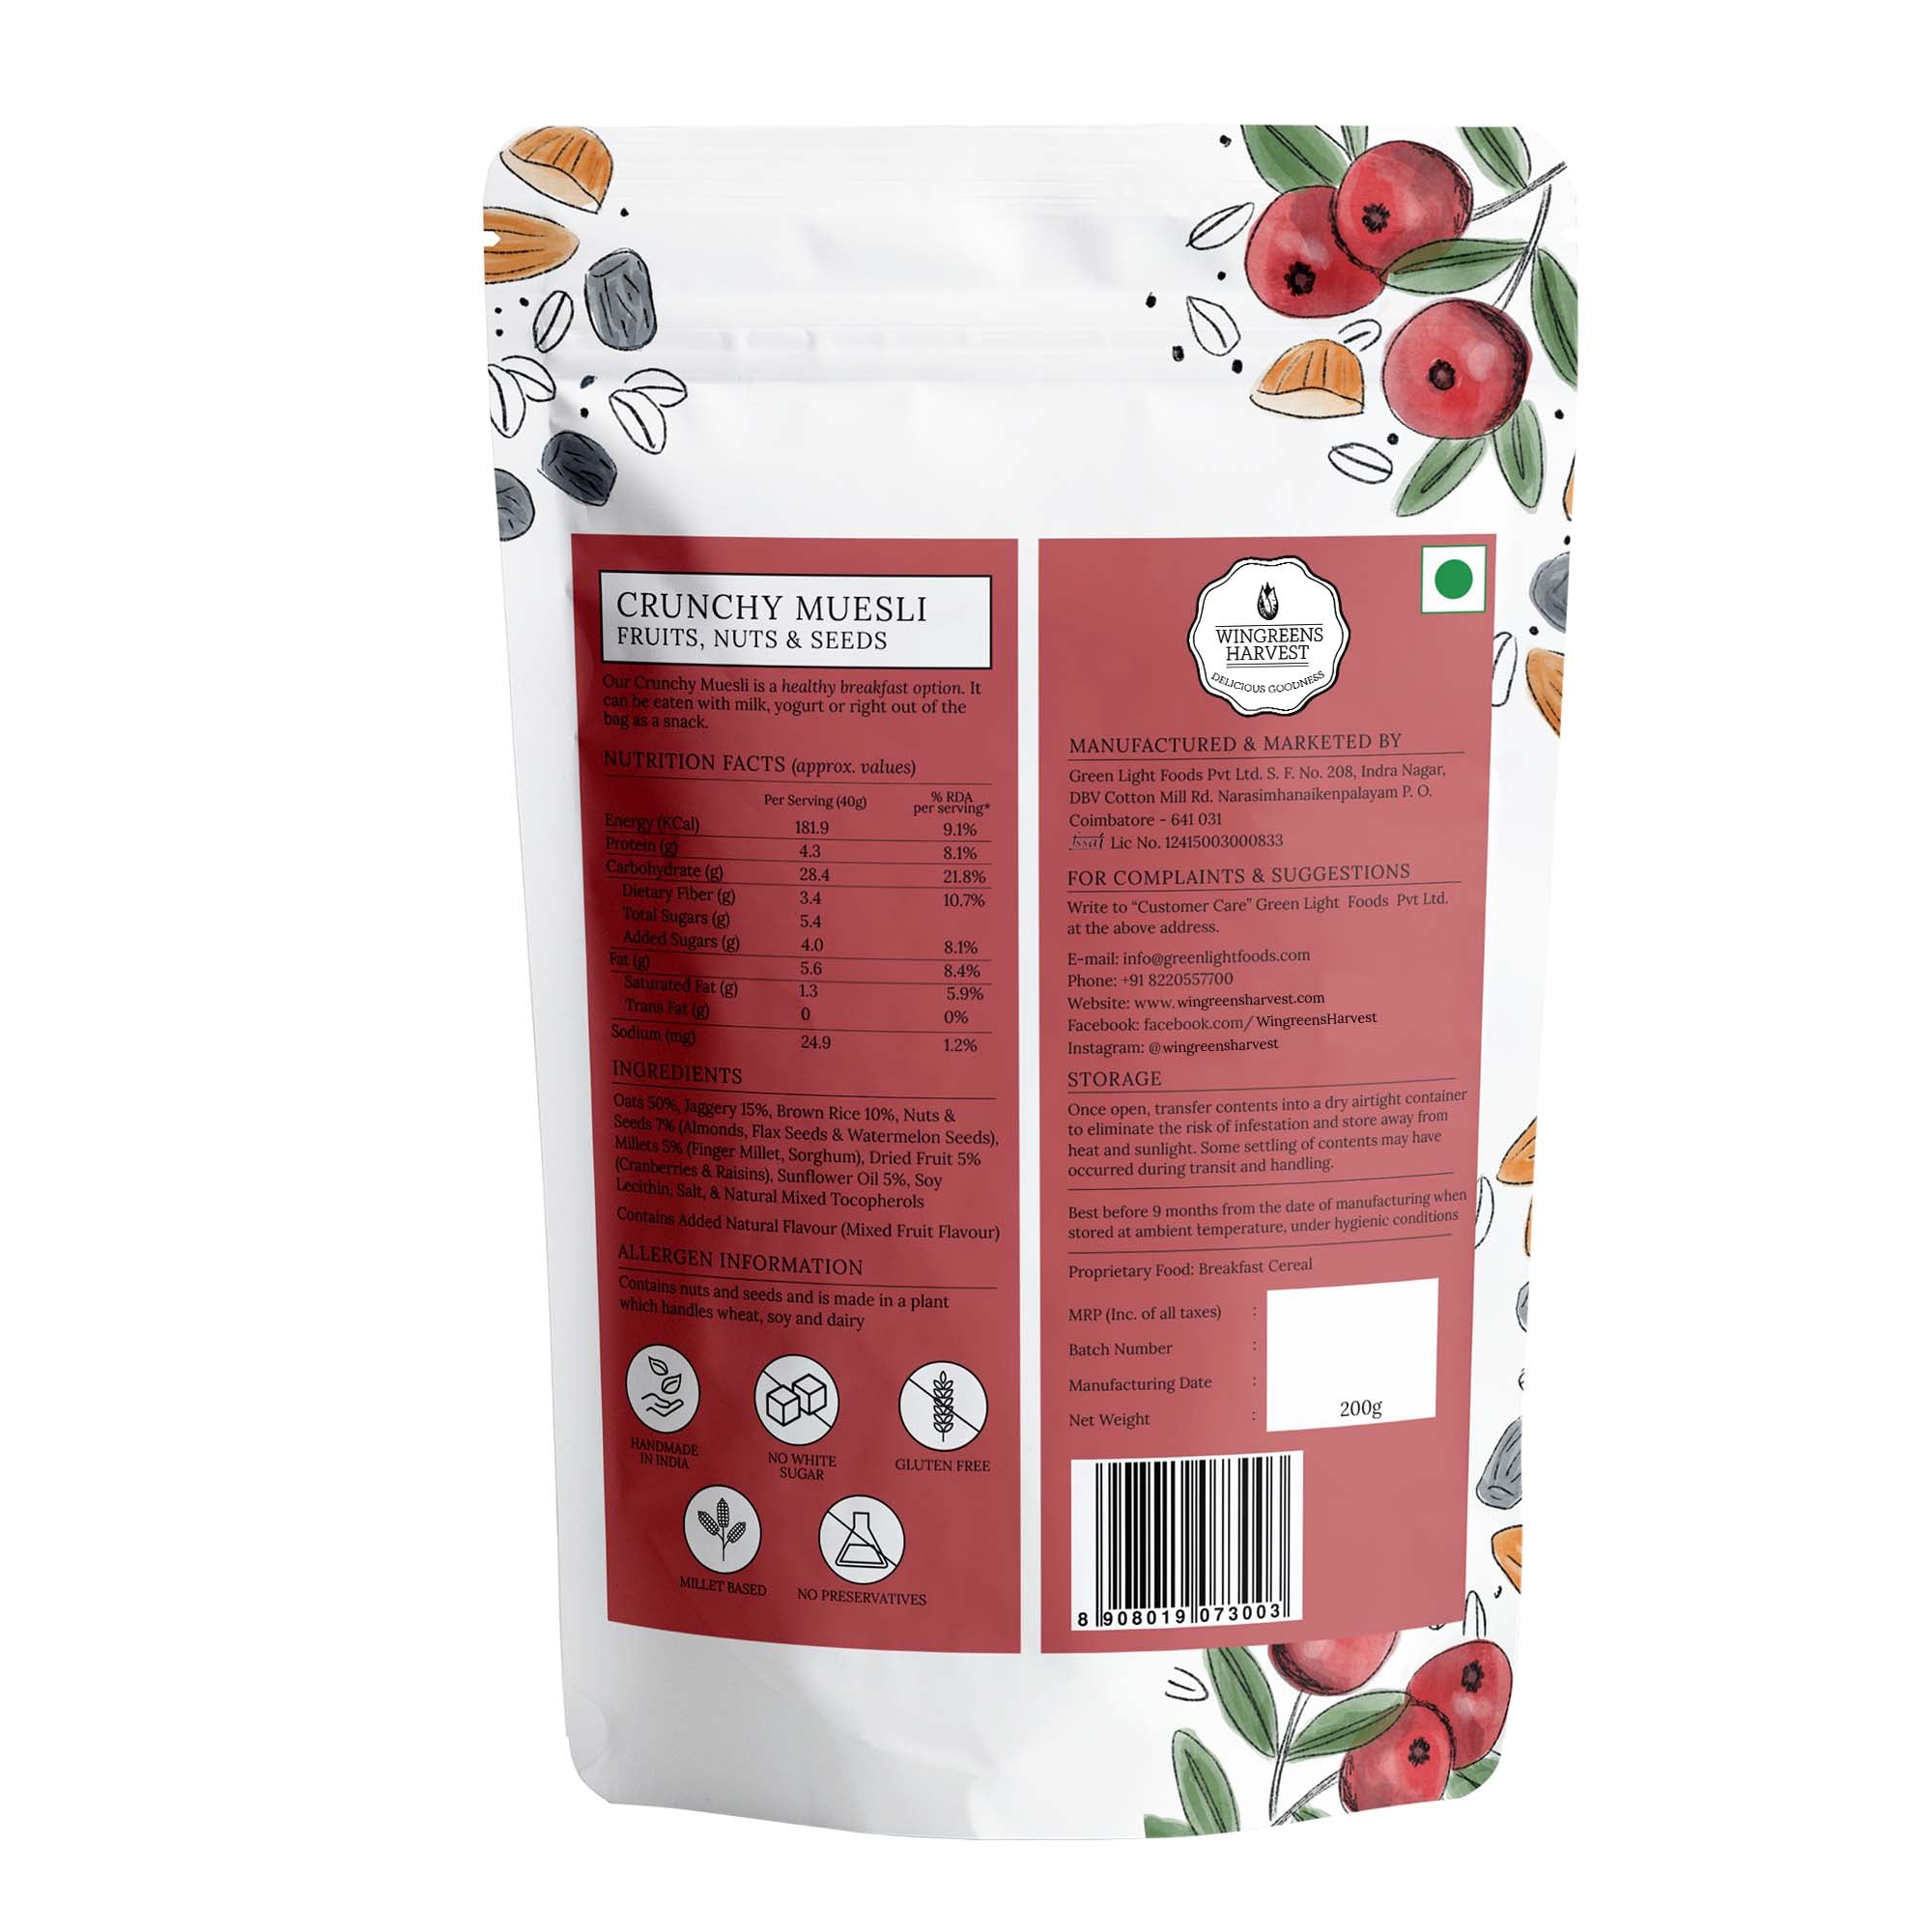 Crunchy Muesli - Fruits, Nuts and Seeds, 2 x 200g